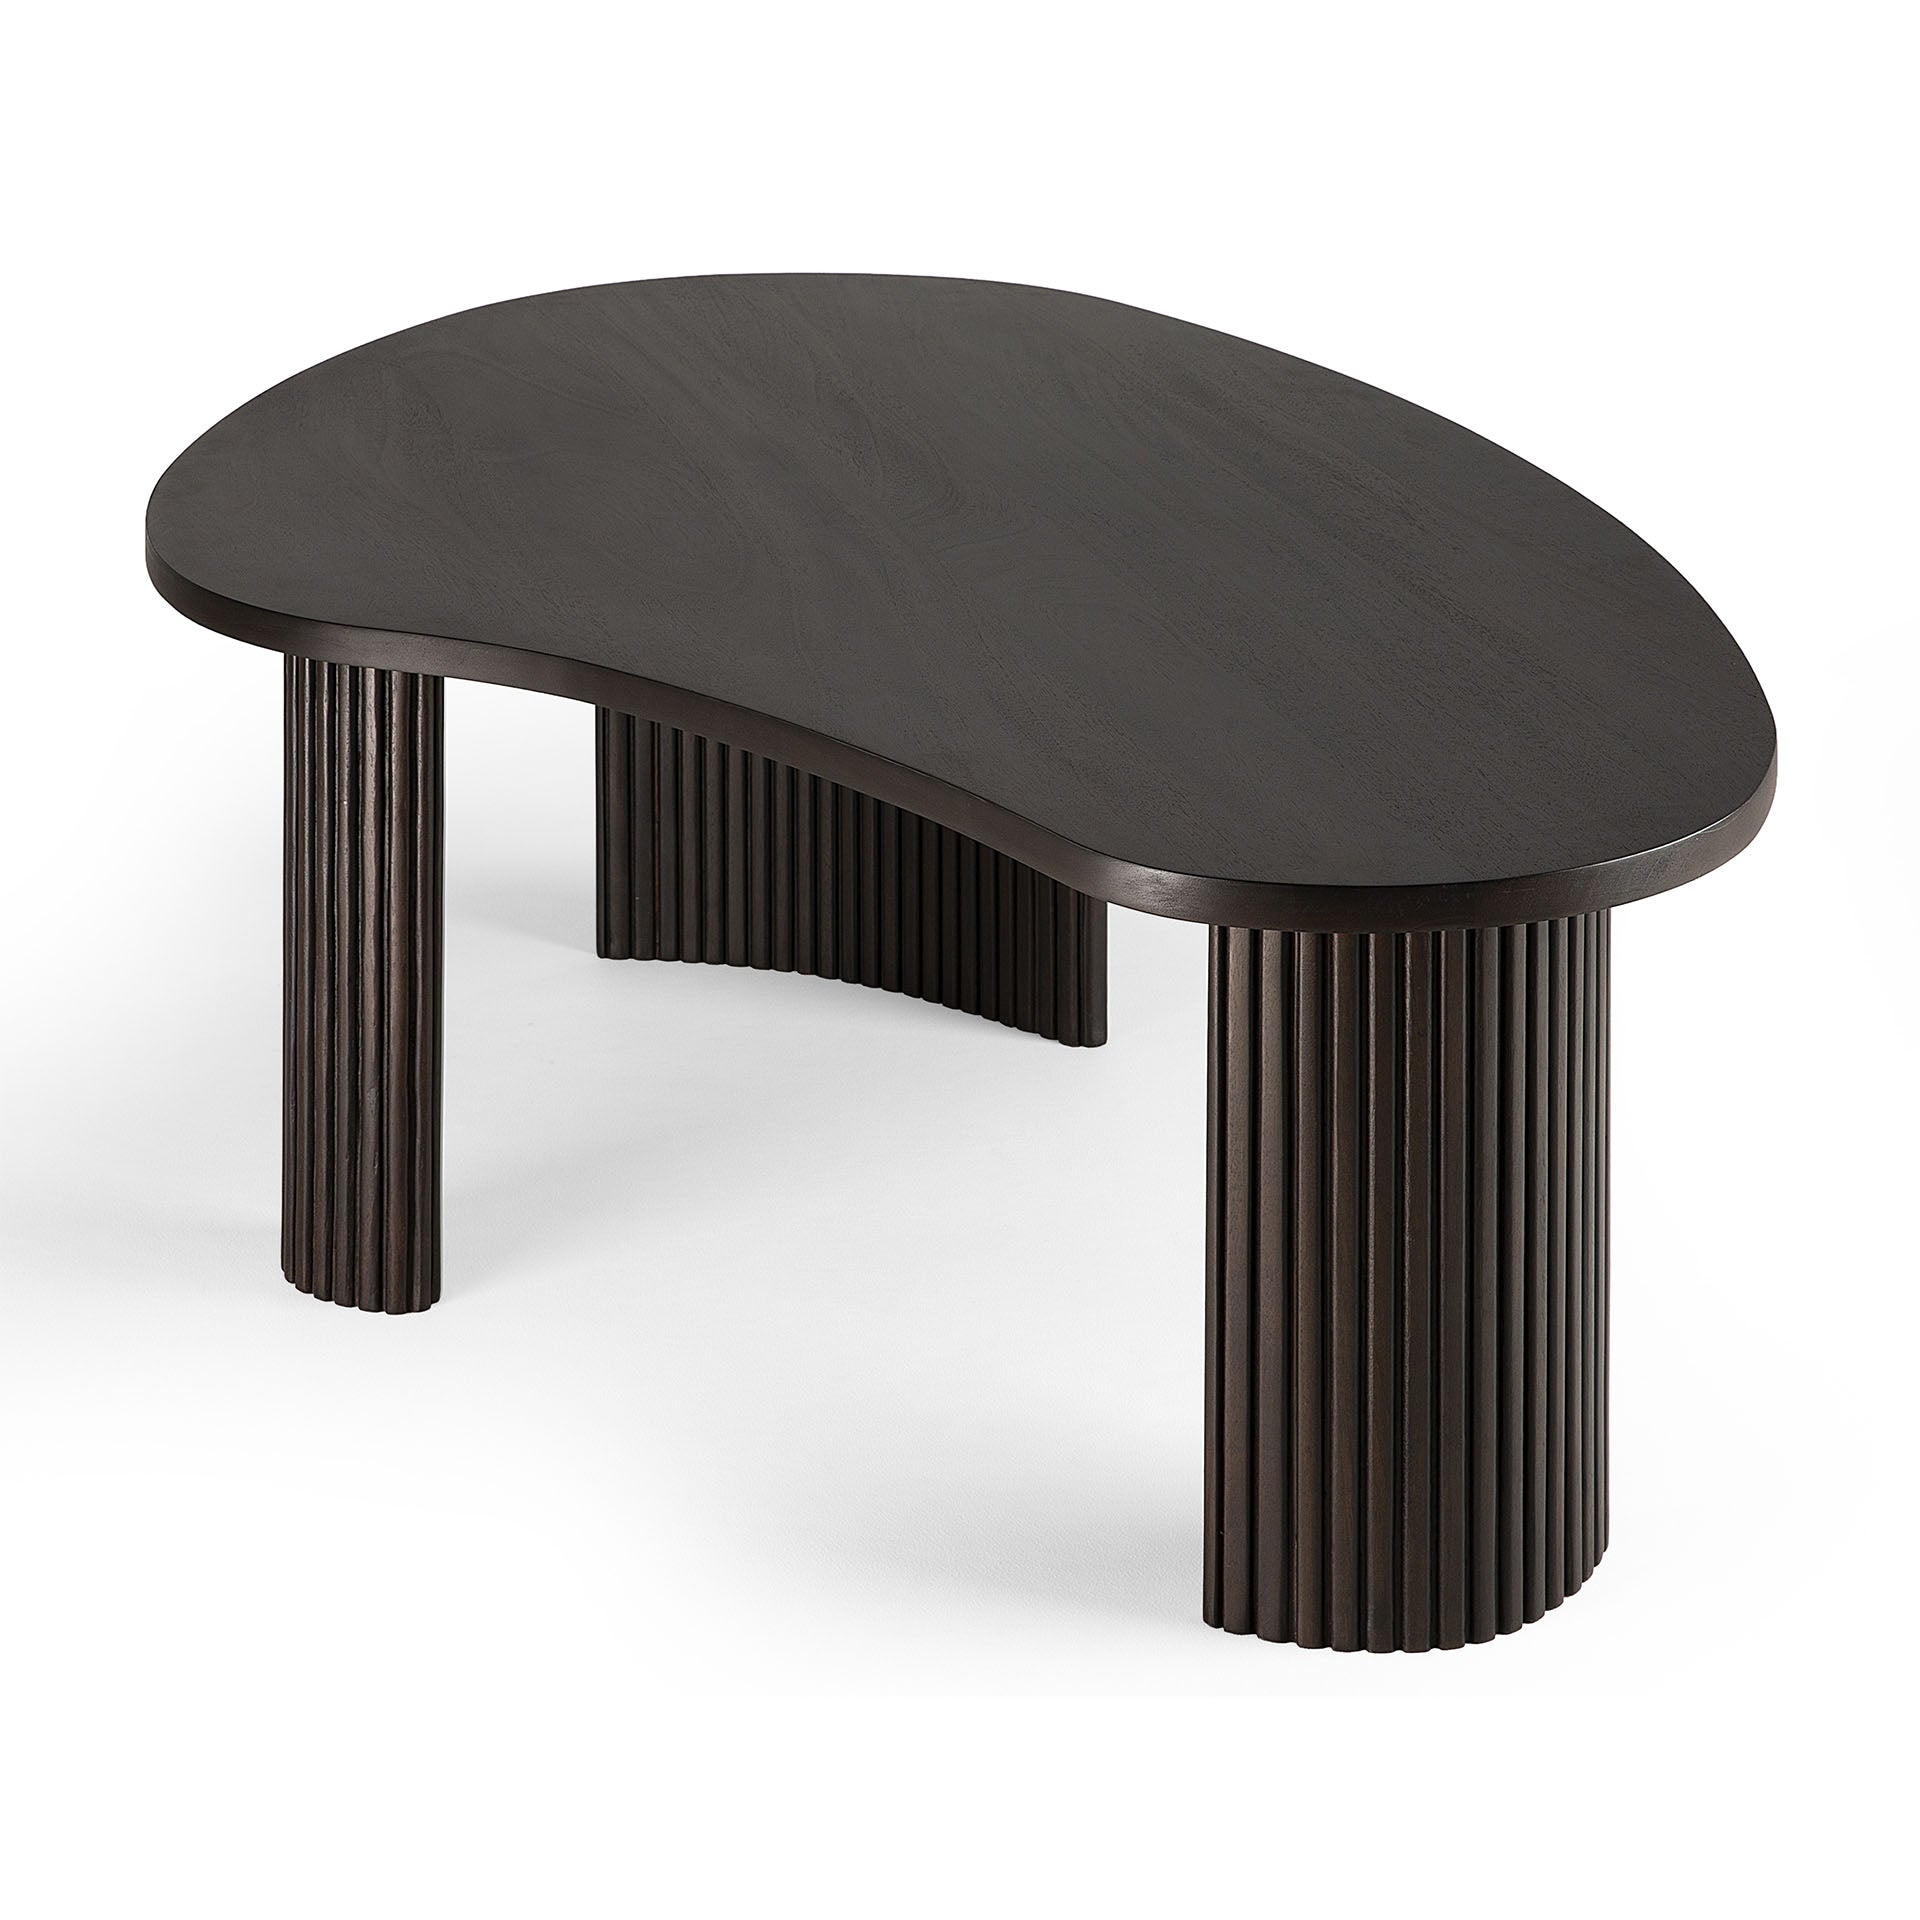 Ethnicraft Boomerang Mahogany Coffee Tables available from Make Your House A Home, Bendigo, Victoria, Australia